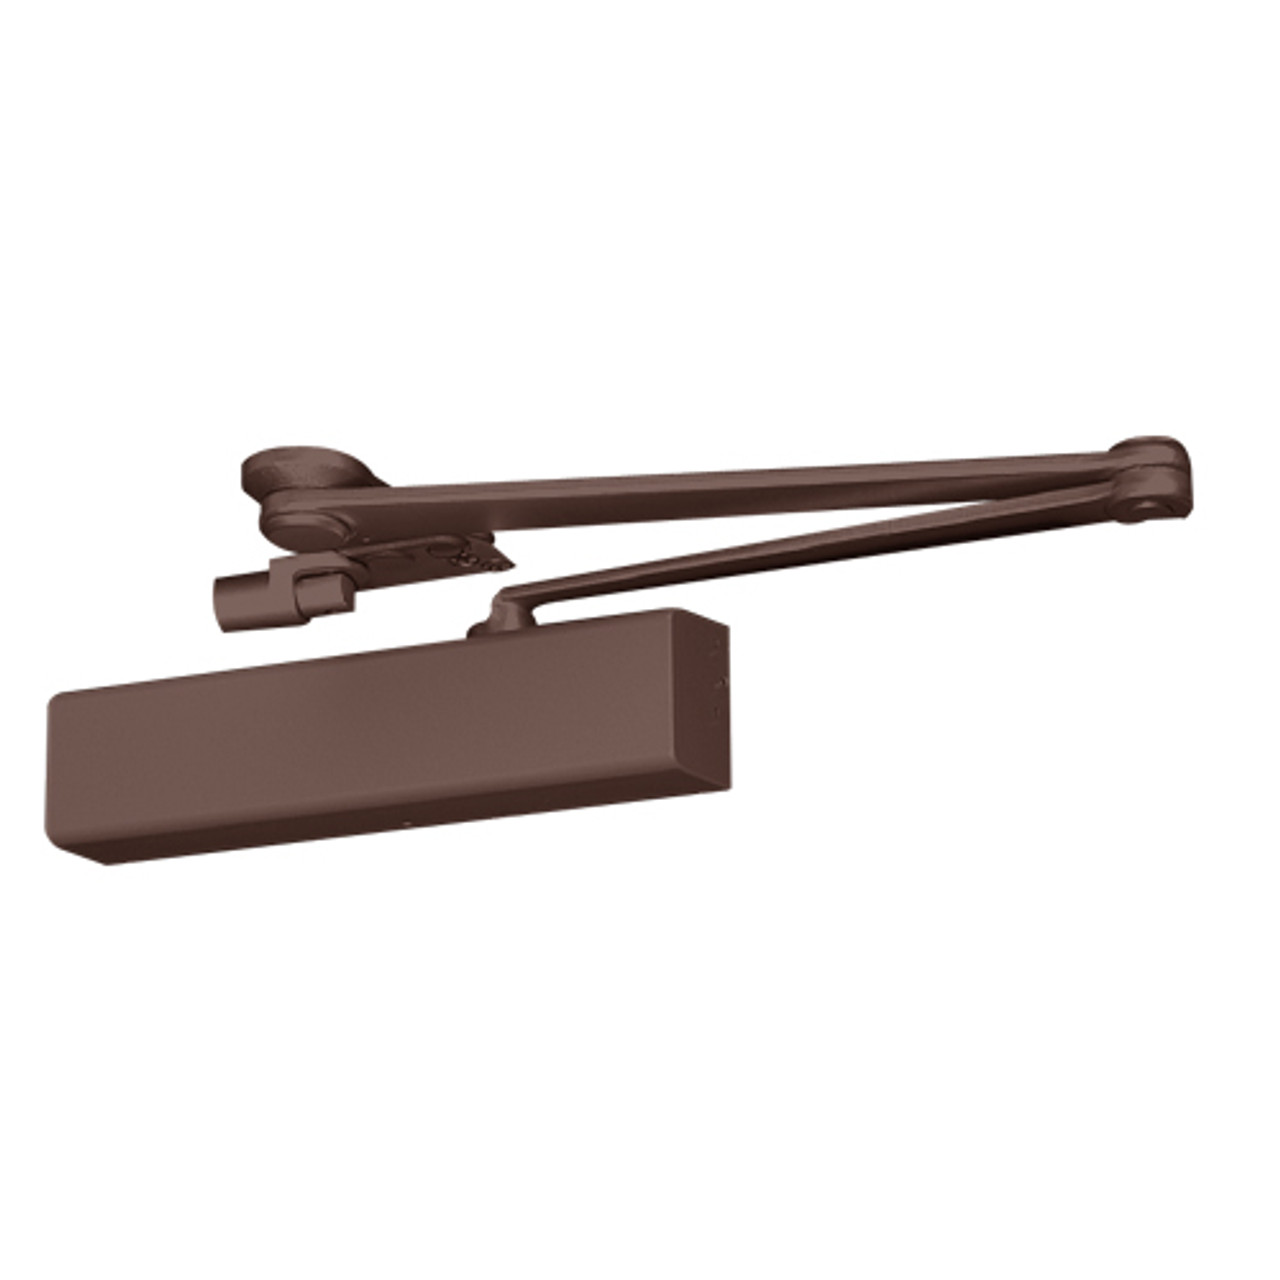 CPS8501TDA-690 Norton 8000 Series Full Cover Hold Open Door Closers with CloserPlus Spring Arm in Statuary Bronze Finish